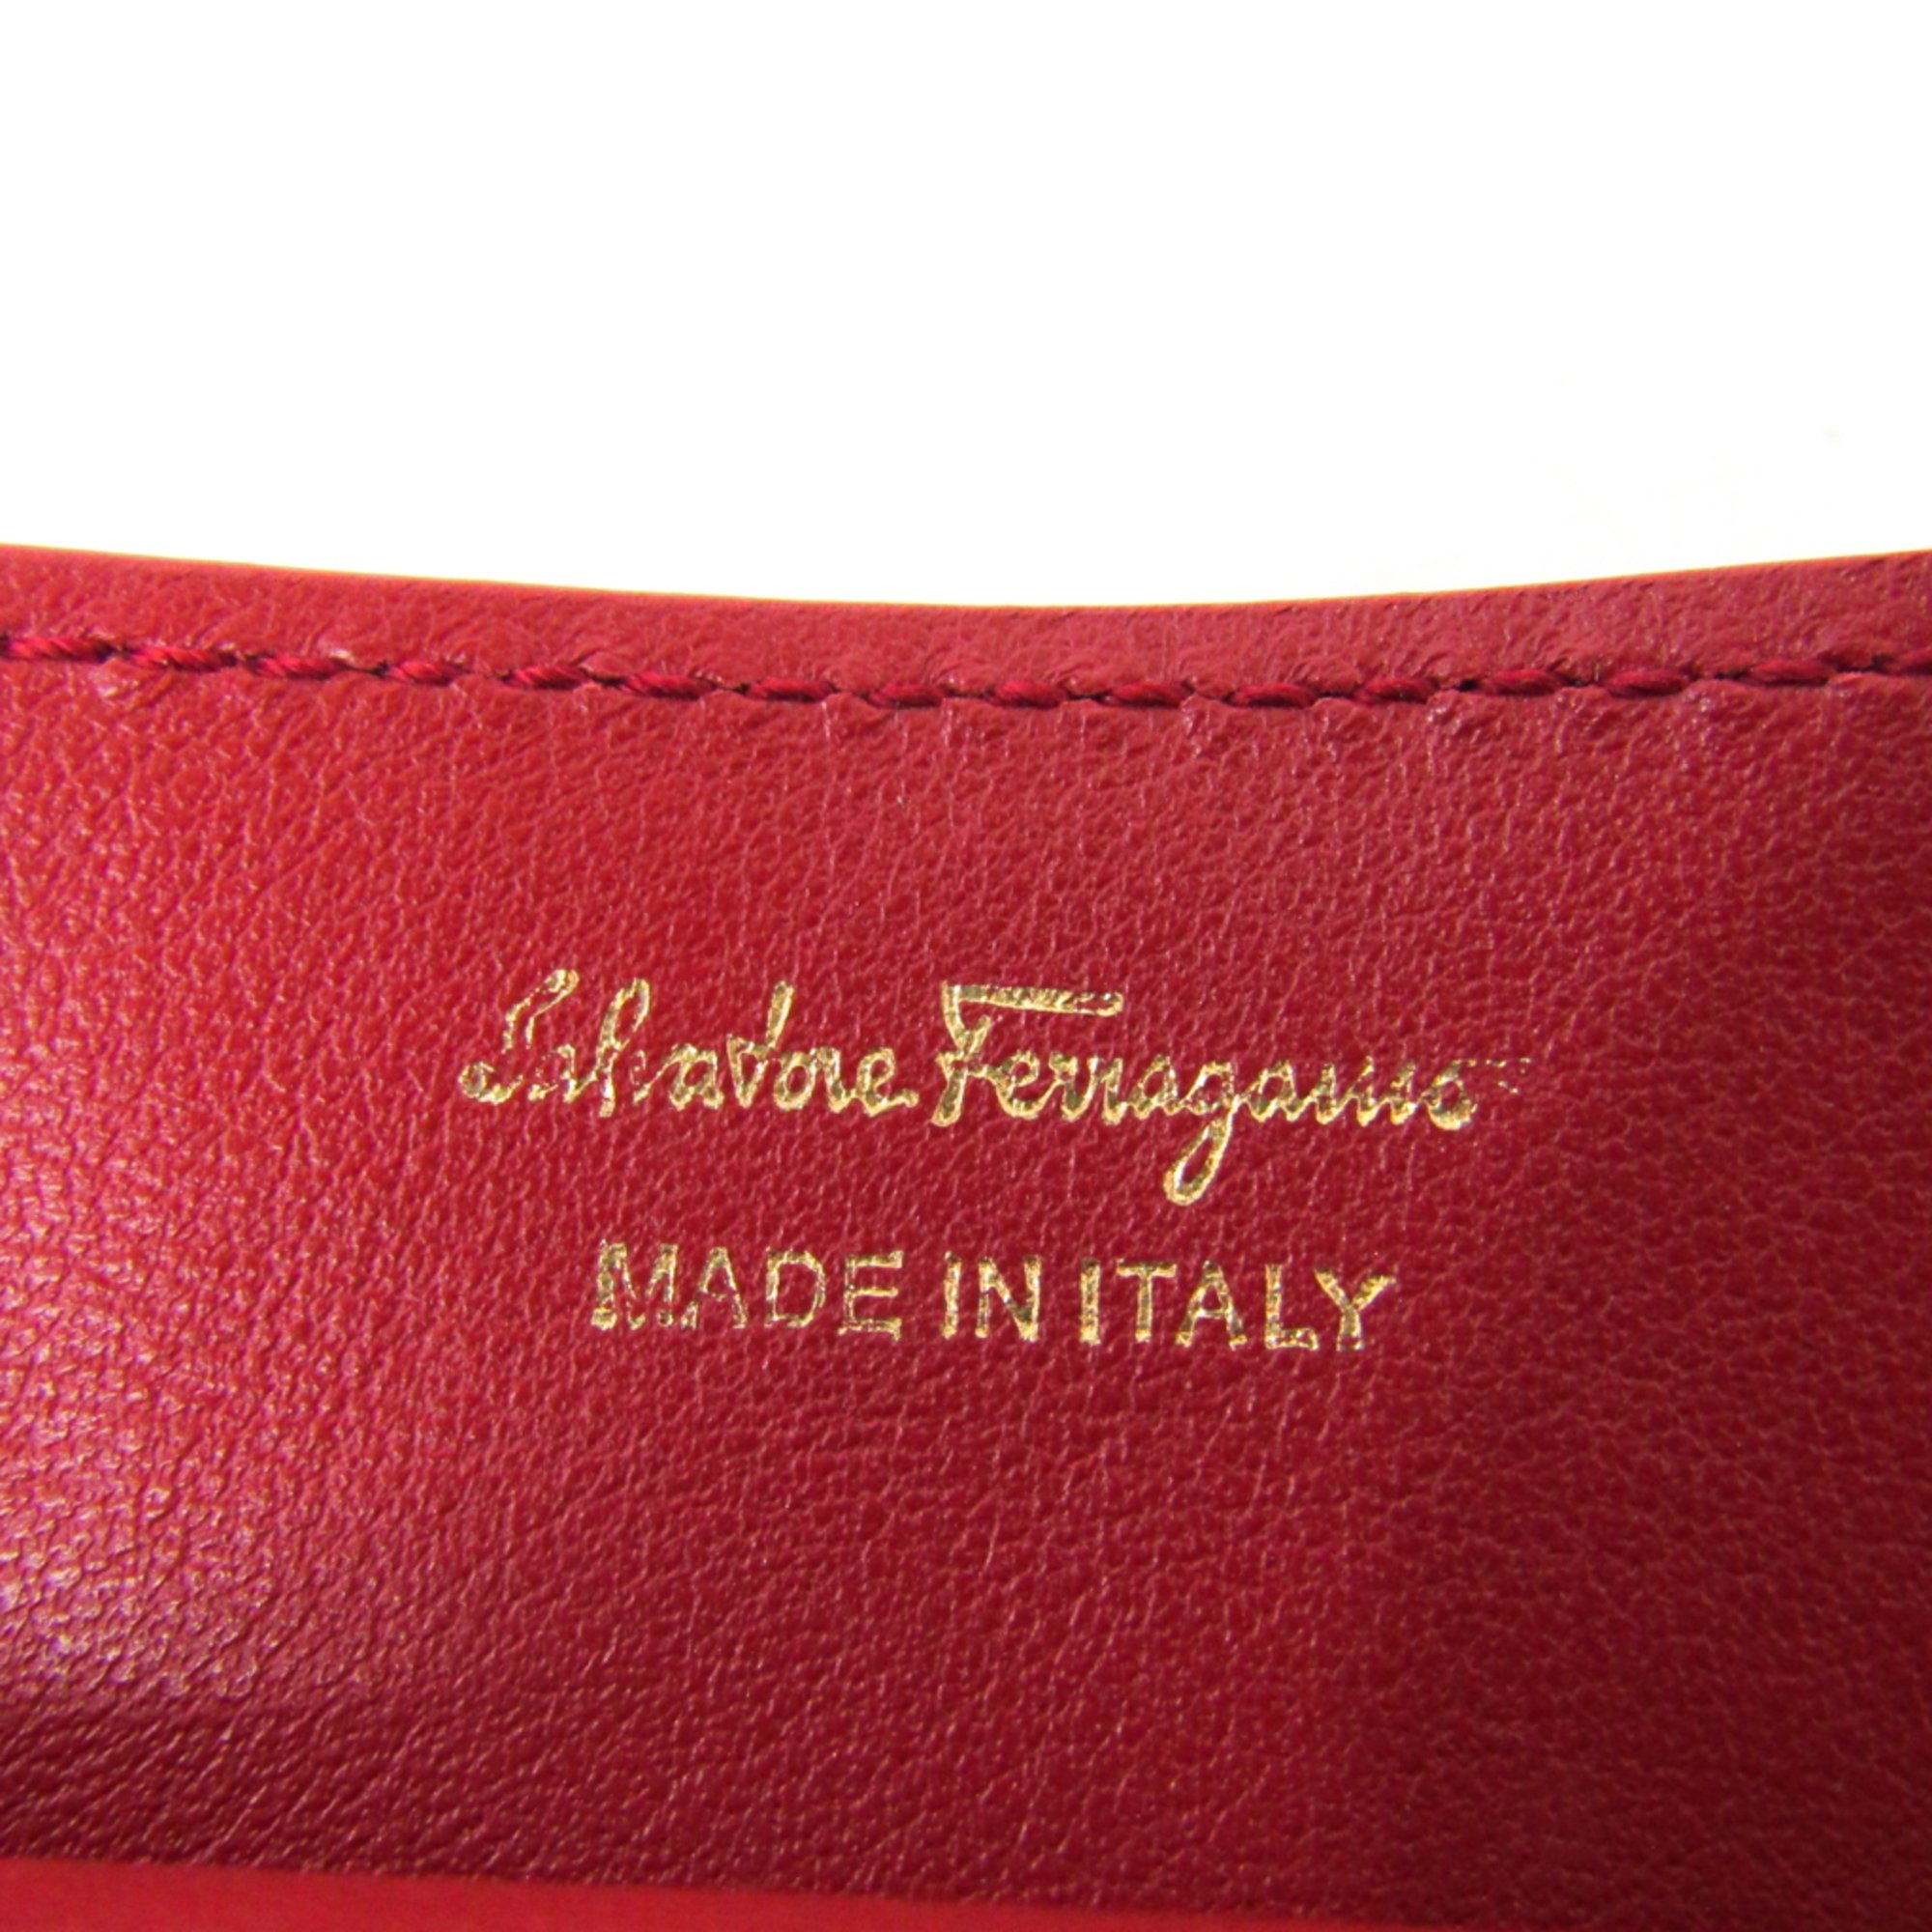 Salvatore Ferragamo Leather Phone Pouch/sleeve For IPhone 6 Plus Red 22 C430